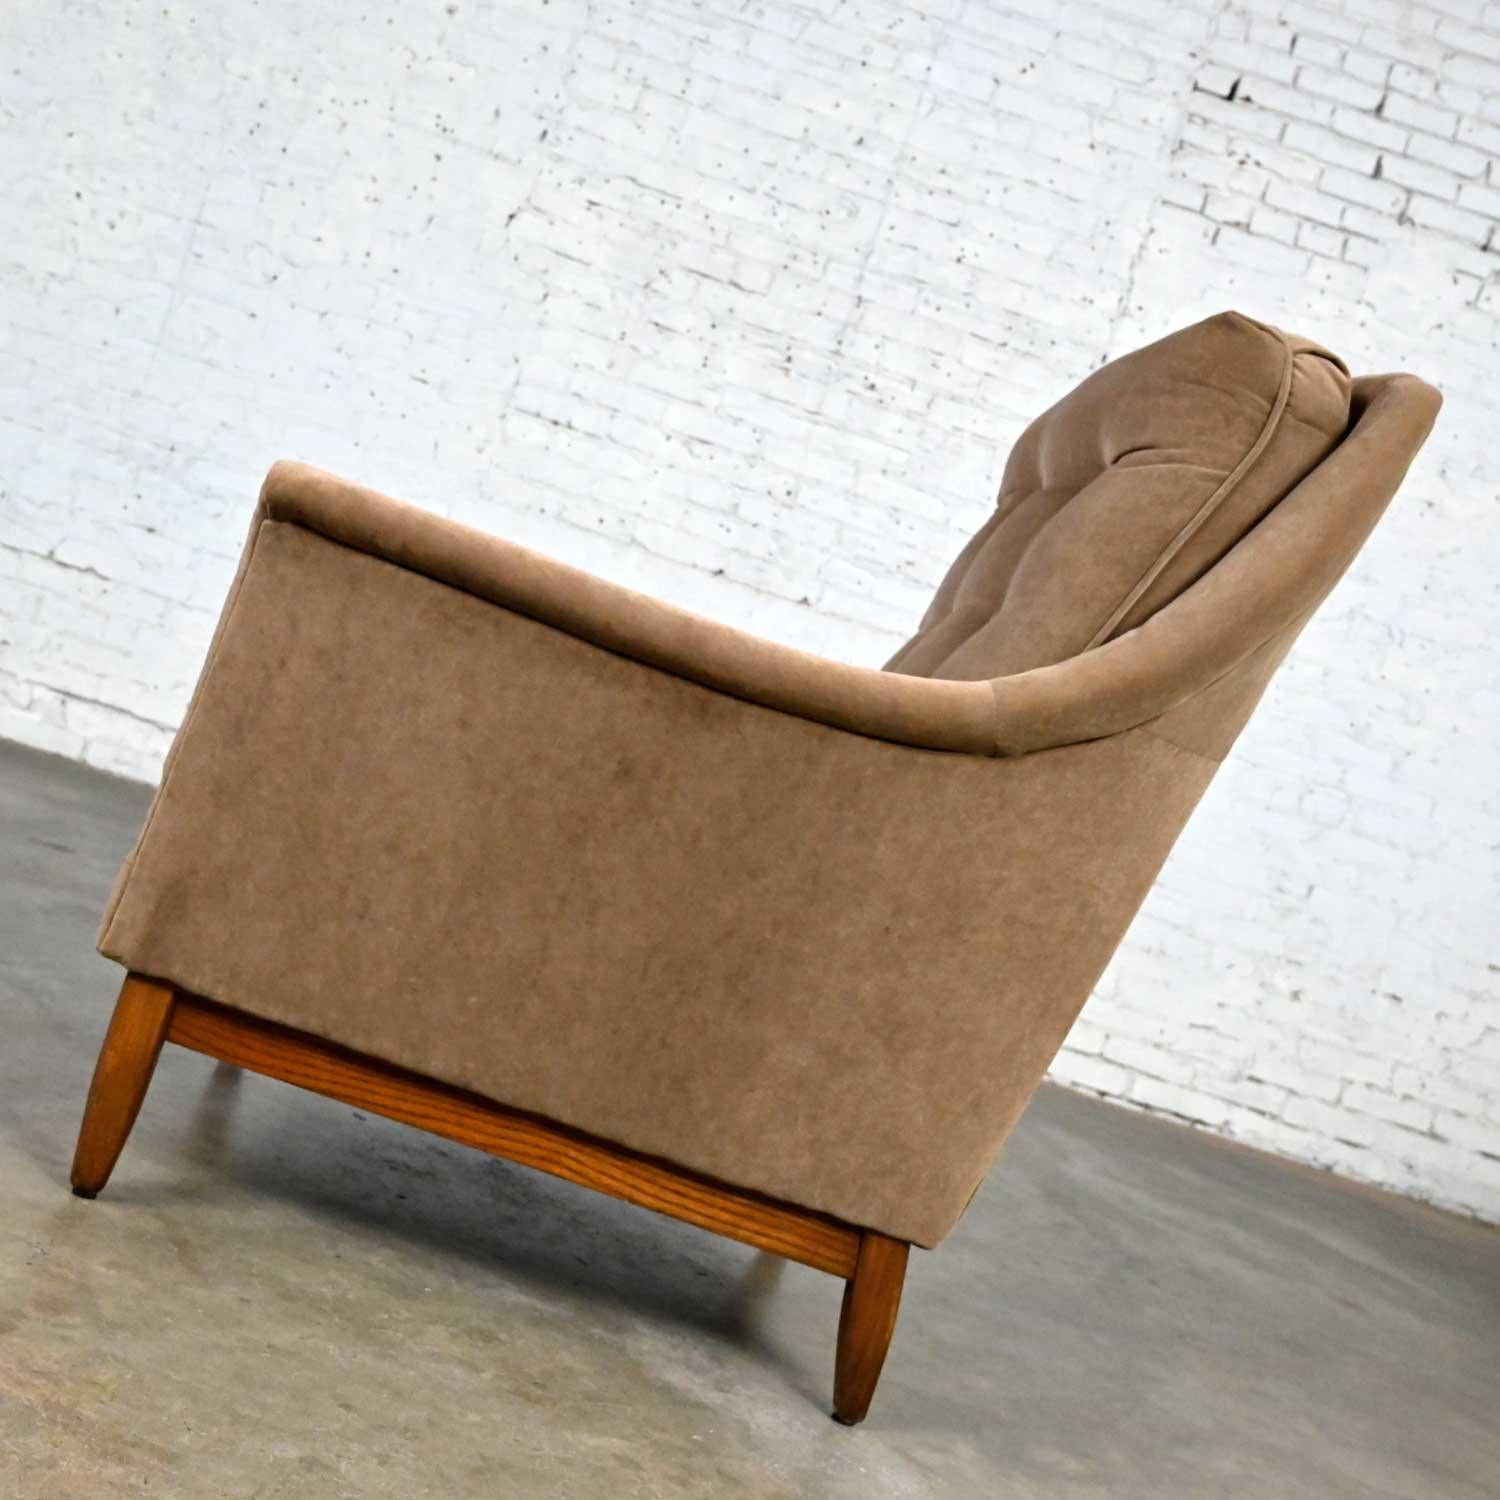 Vintage Mid-Century Modern Mocha Colored Velvet Club Lounge Chair Style Dunbar In Good Condition For Sale In Topeka, KS